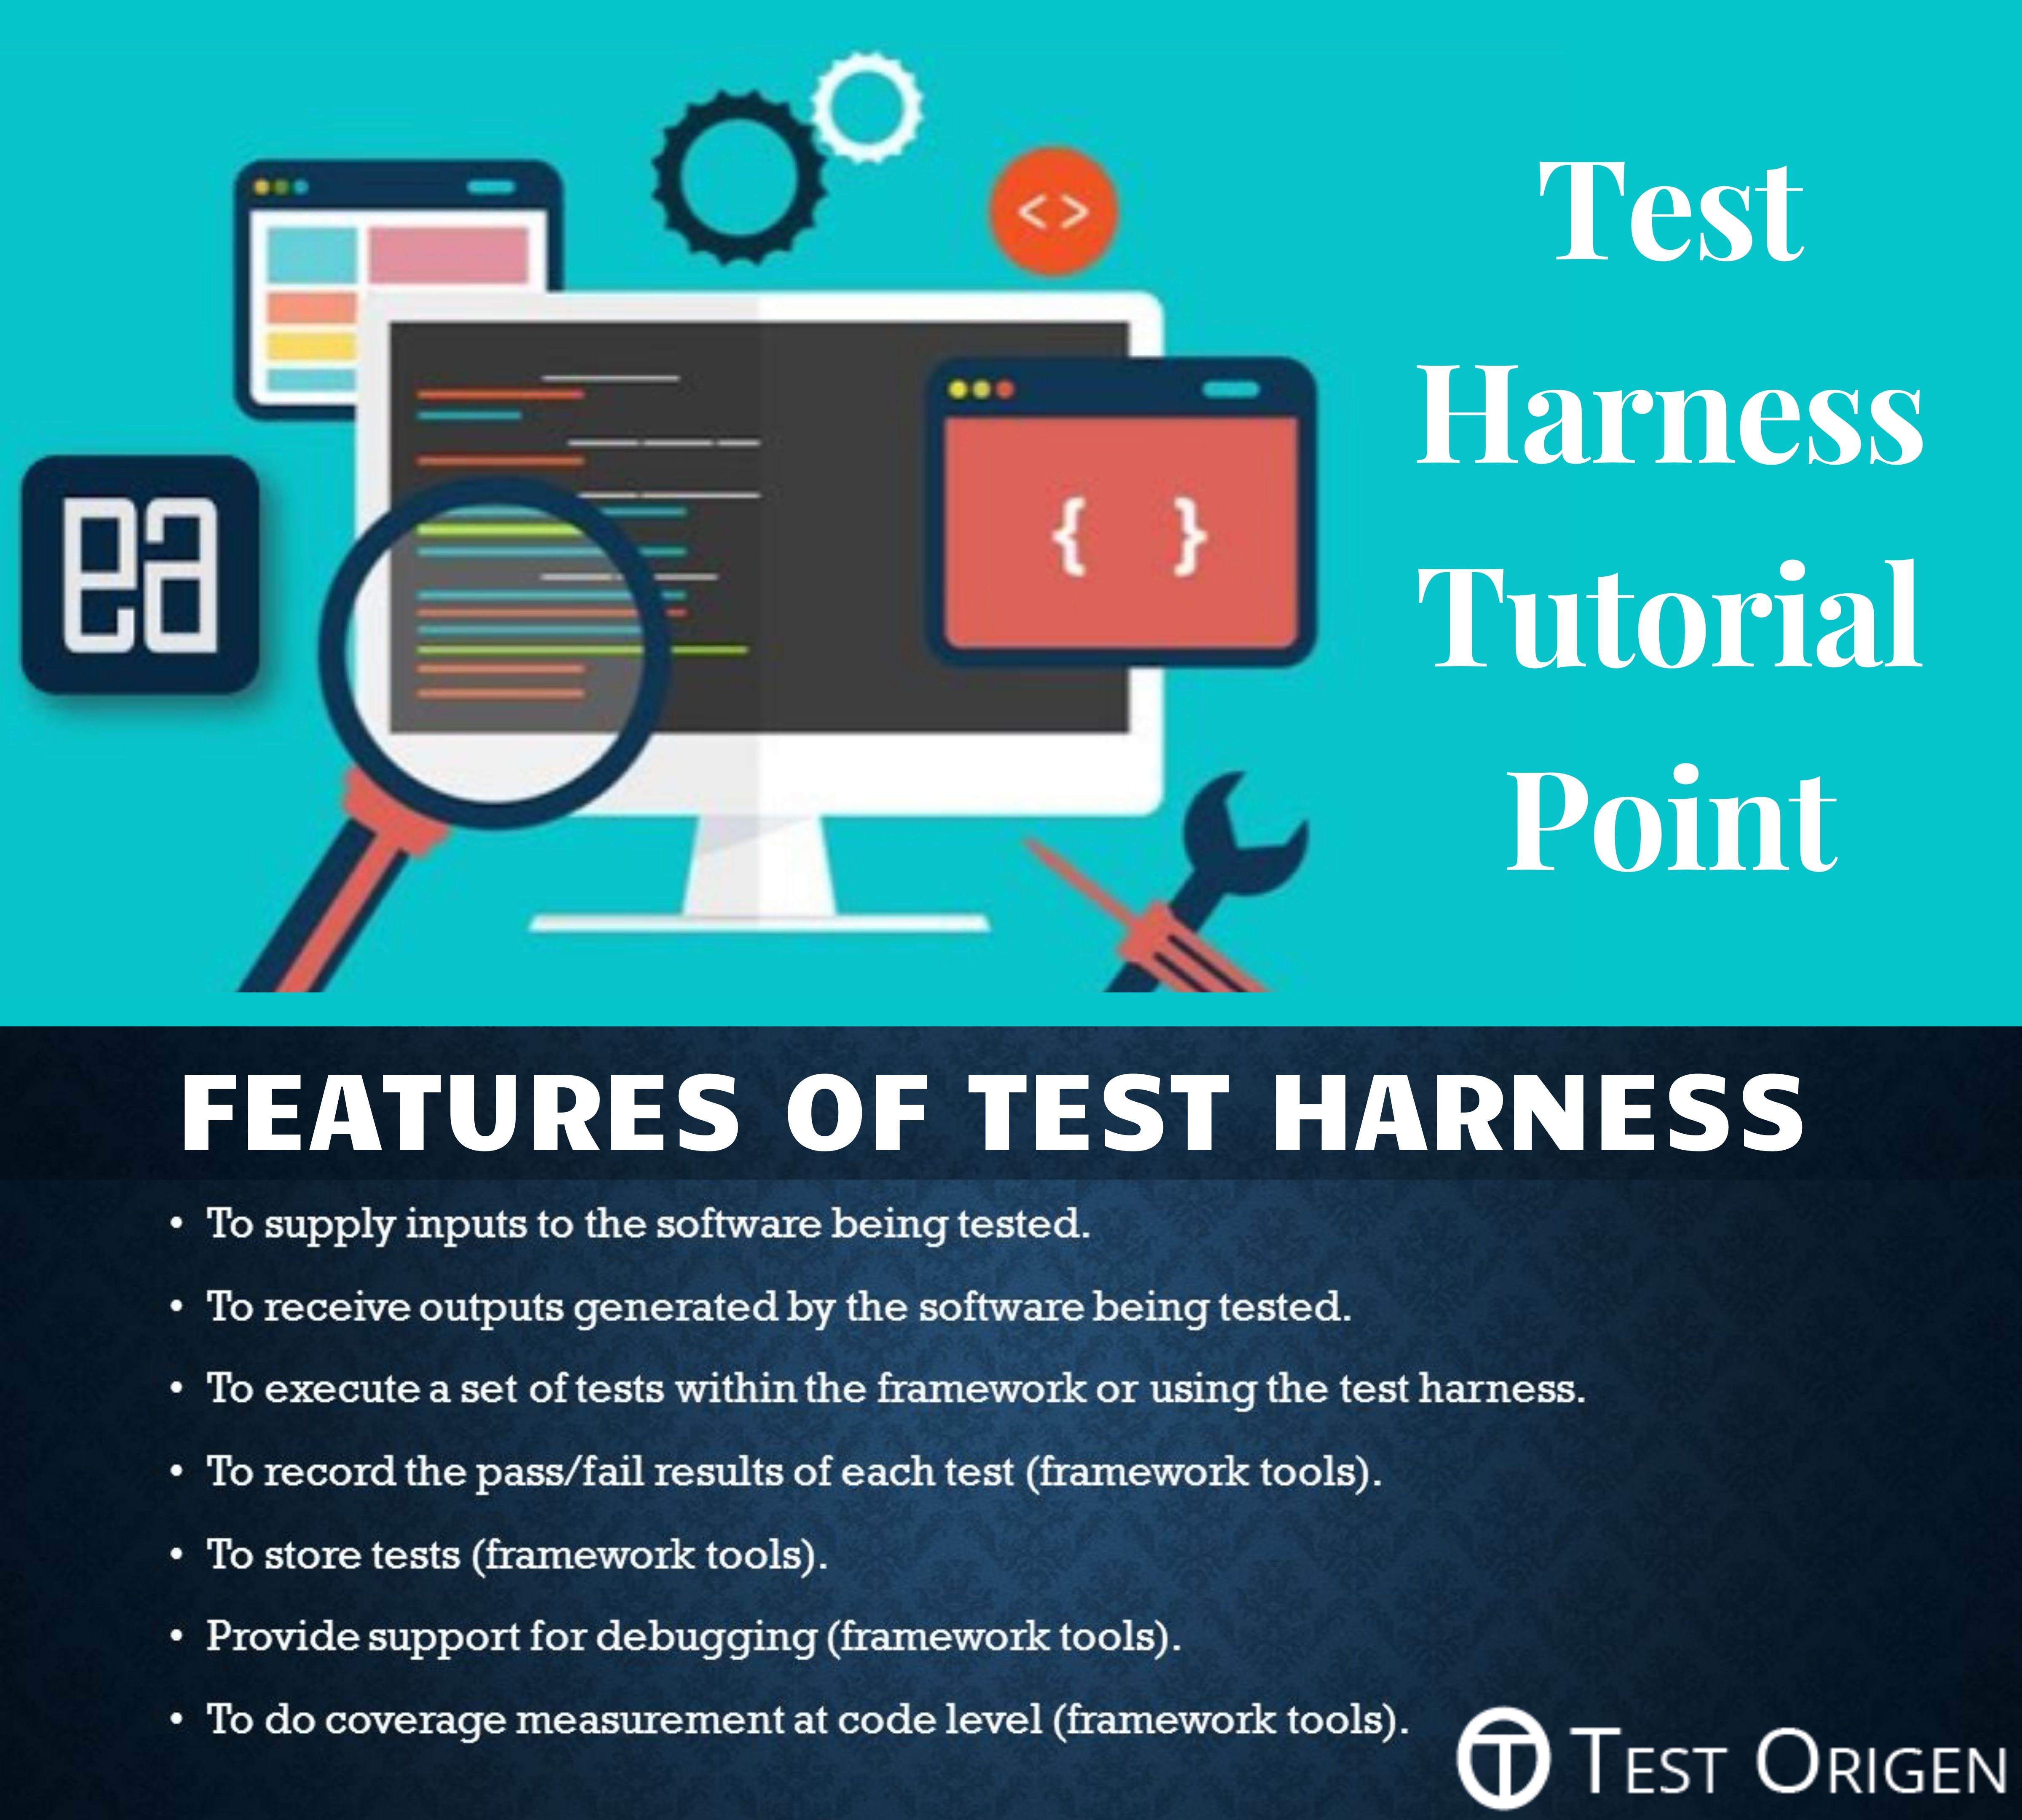 Test Harness Tutorial Point